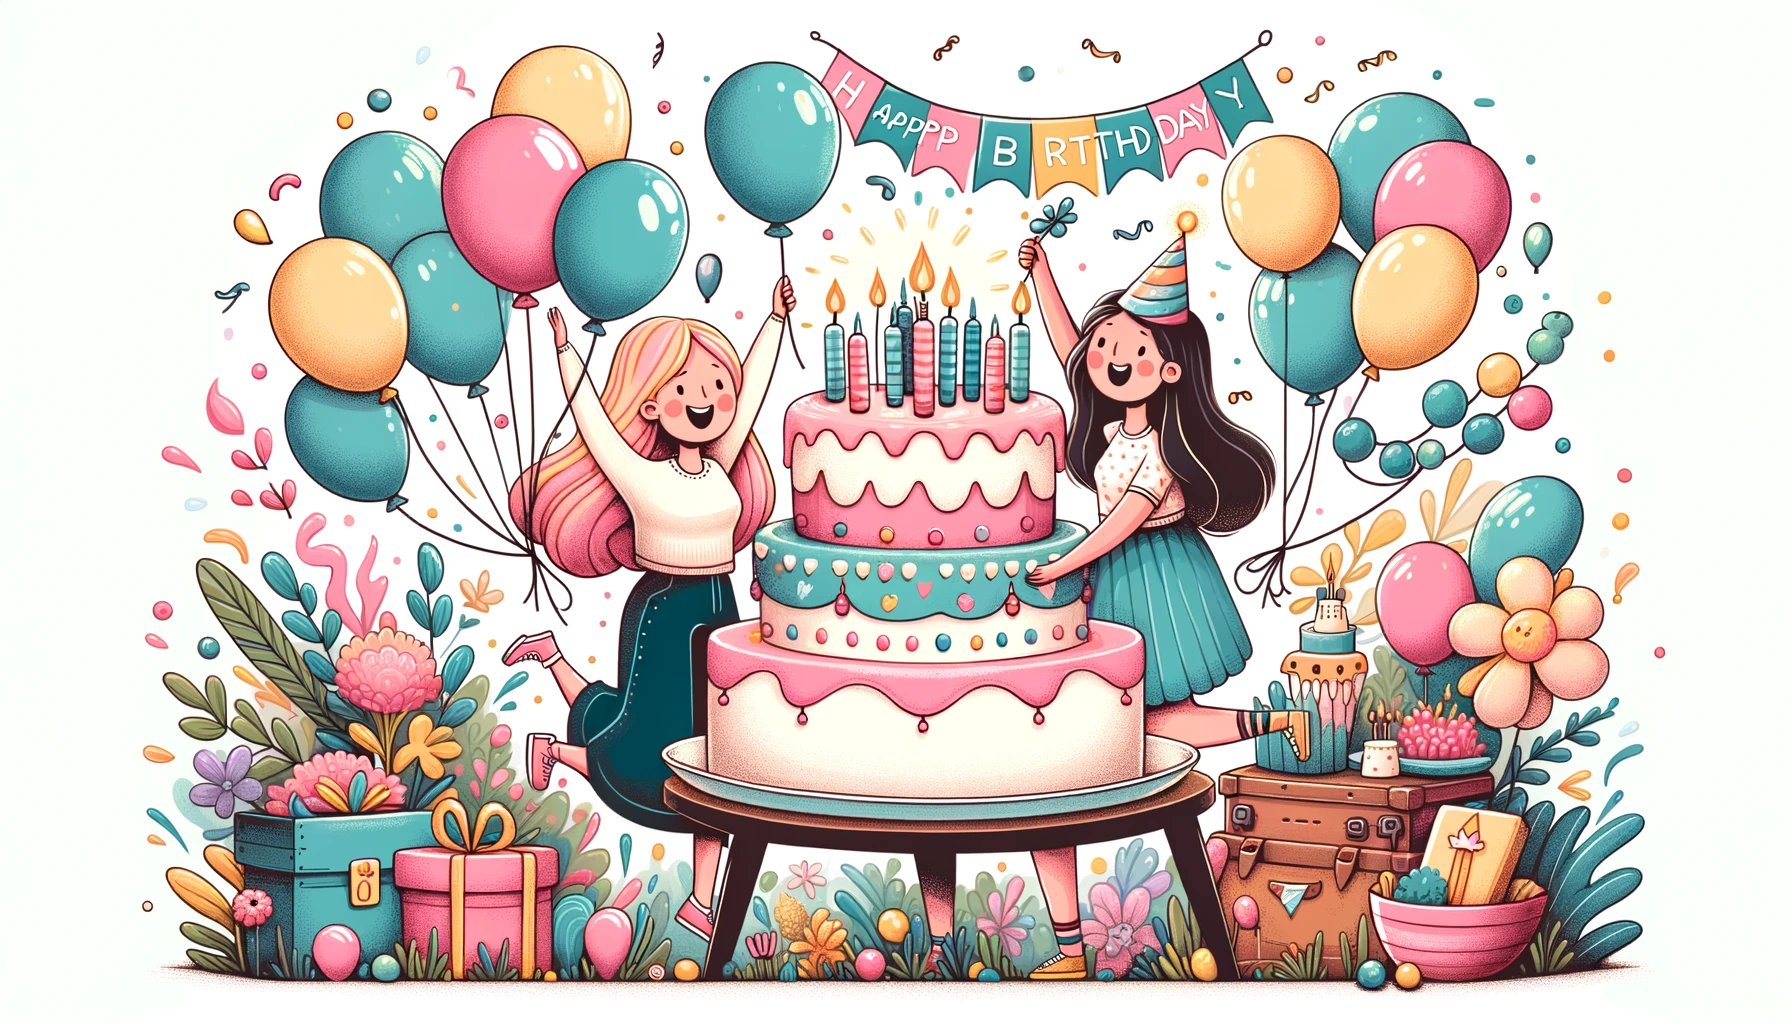 Birthday Wishes for a Woman from Another Woman